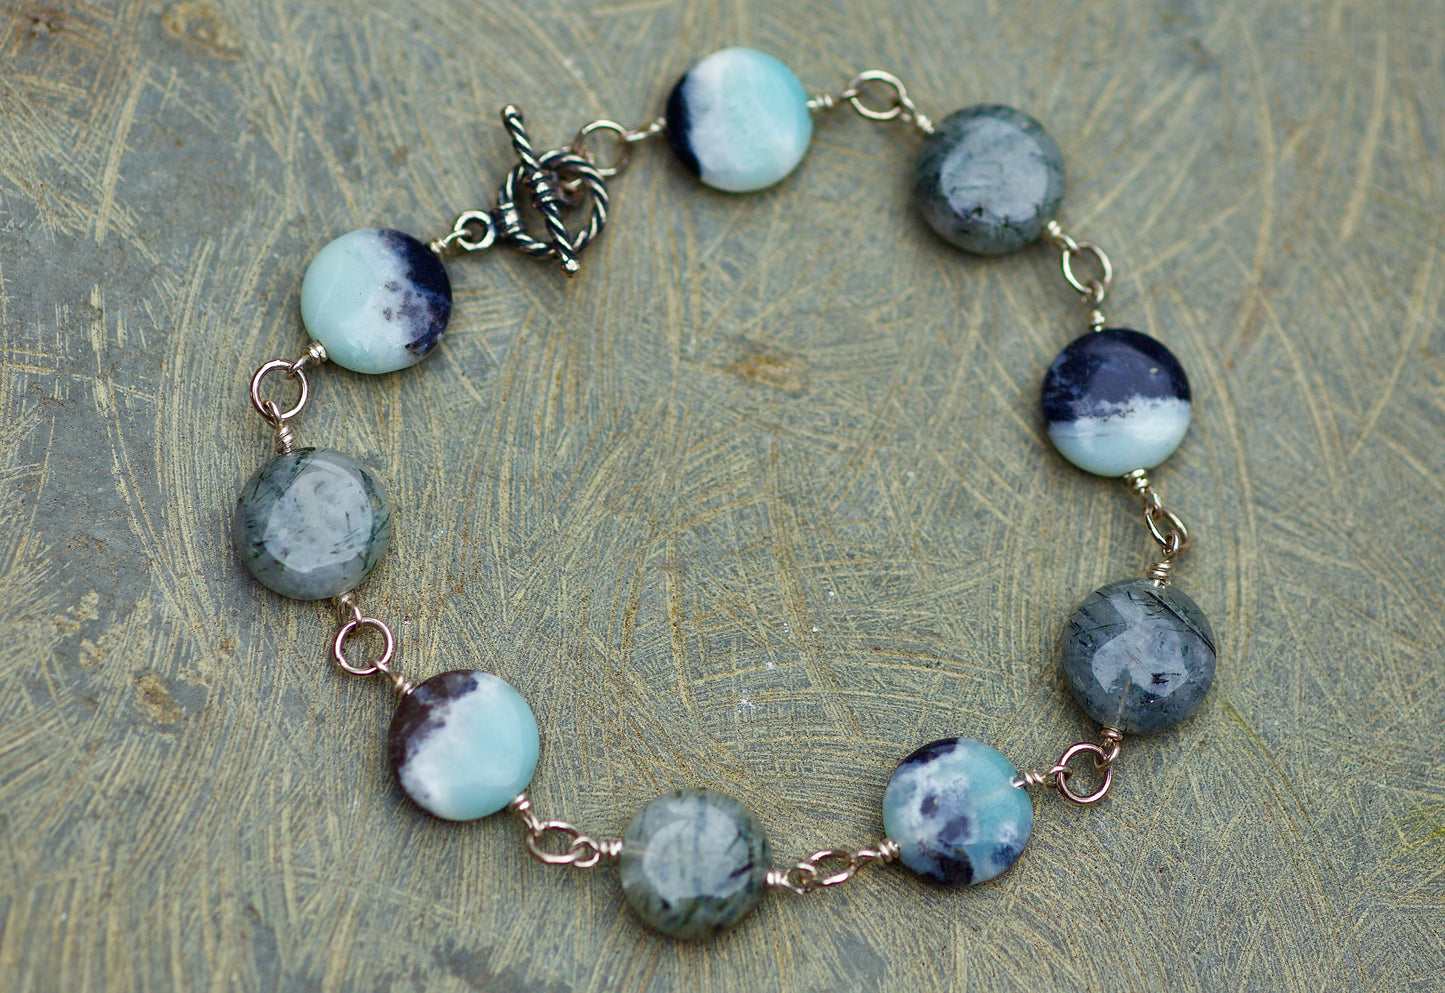 Sale! Pyrite in Amazonite, Tourmalinated Quartz, and Sterling Silver Bracelet, to fit a 7.5 inch wrist